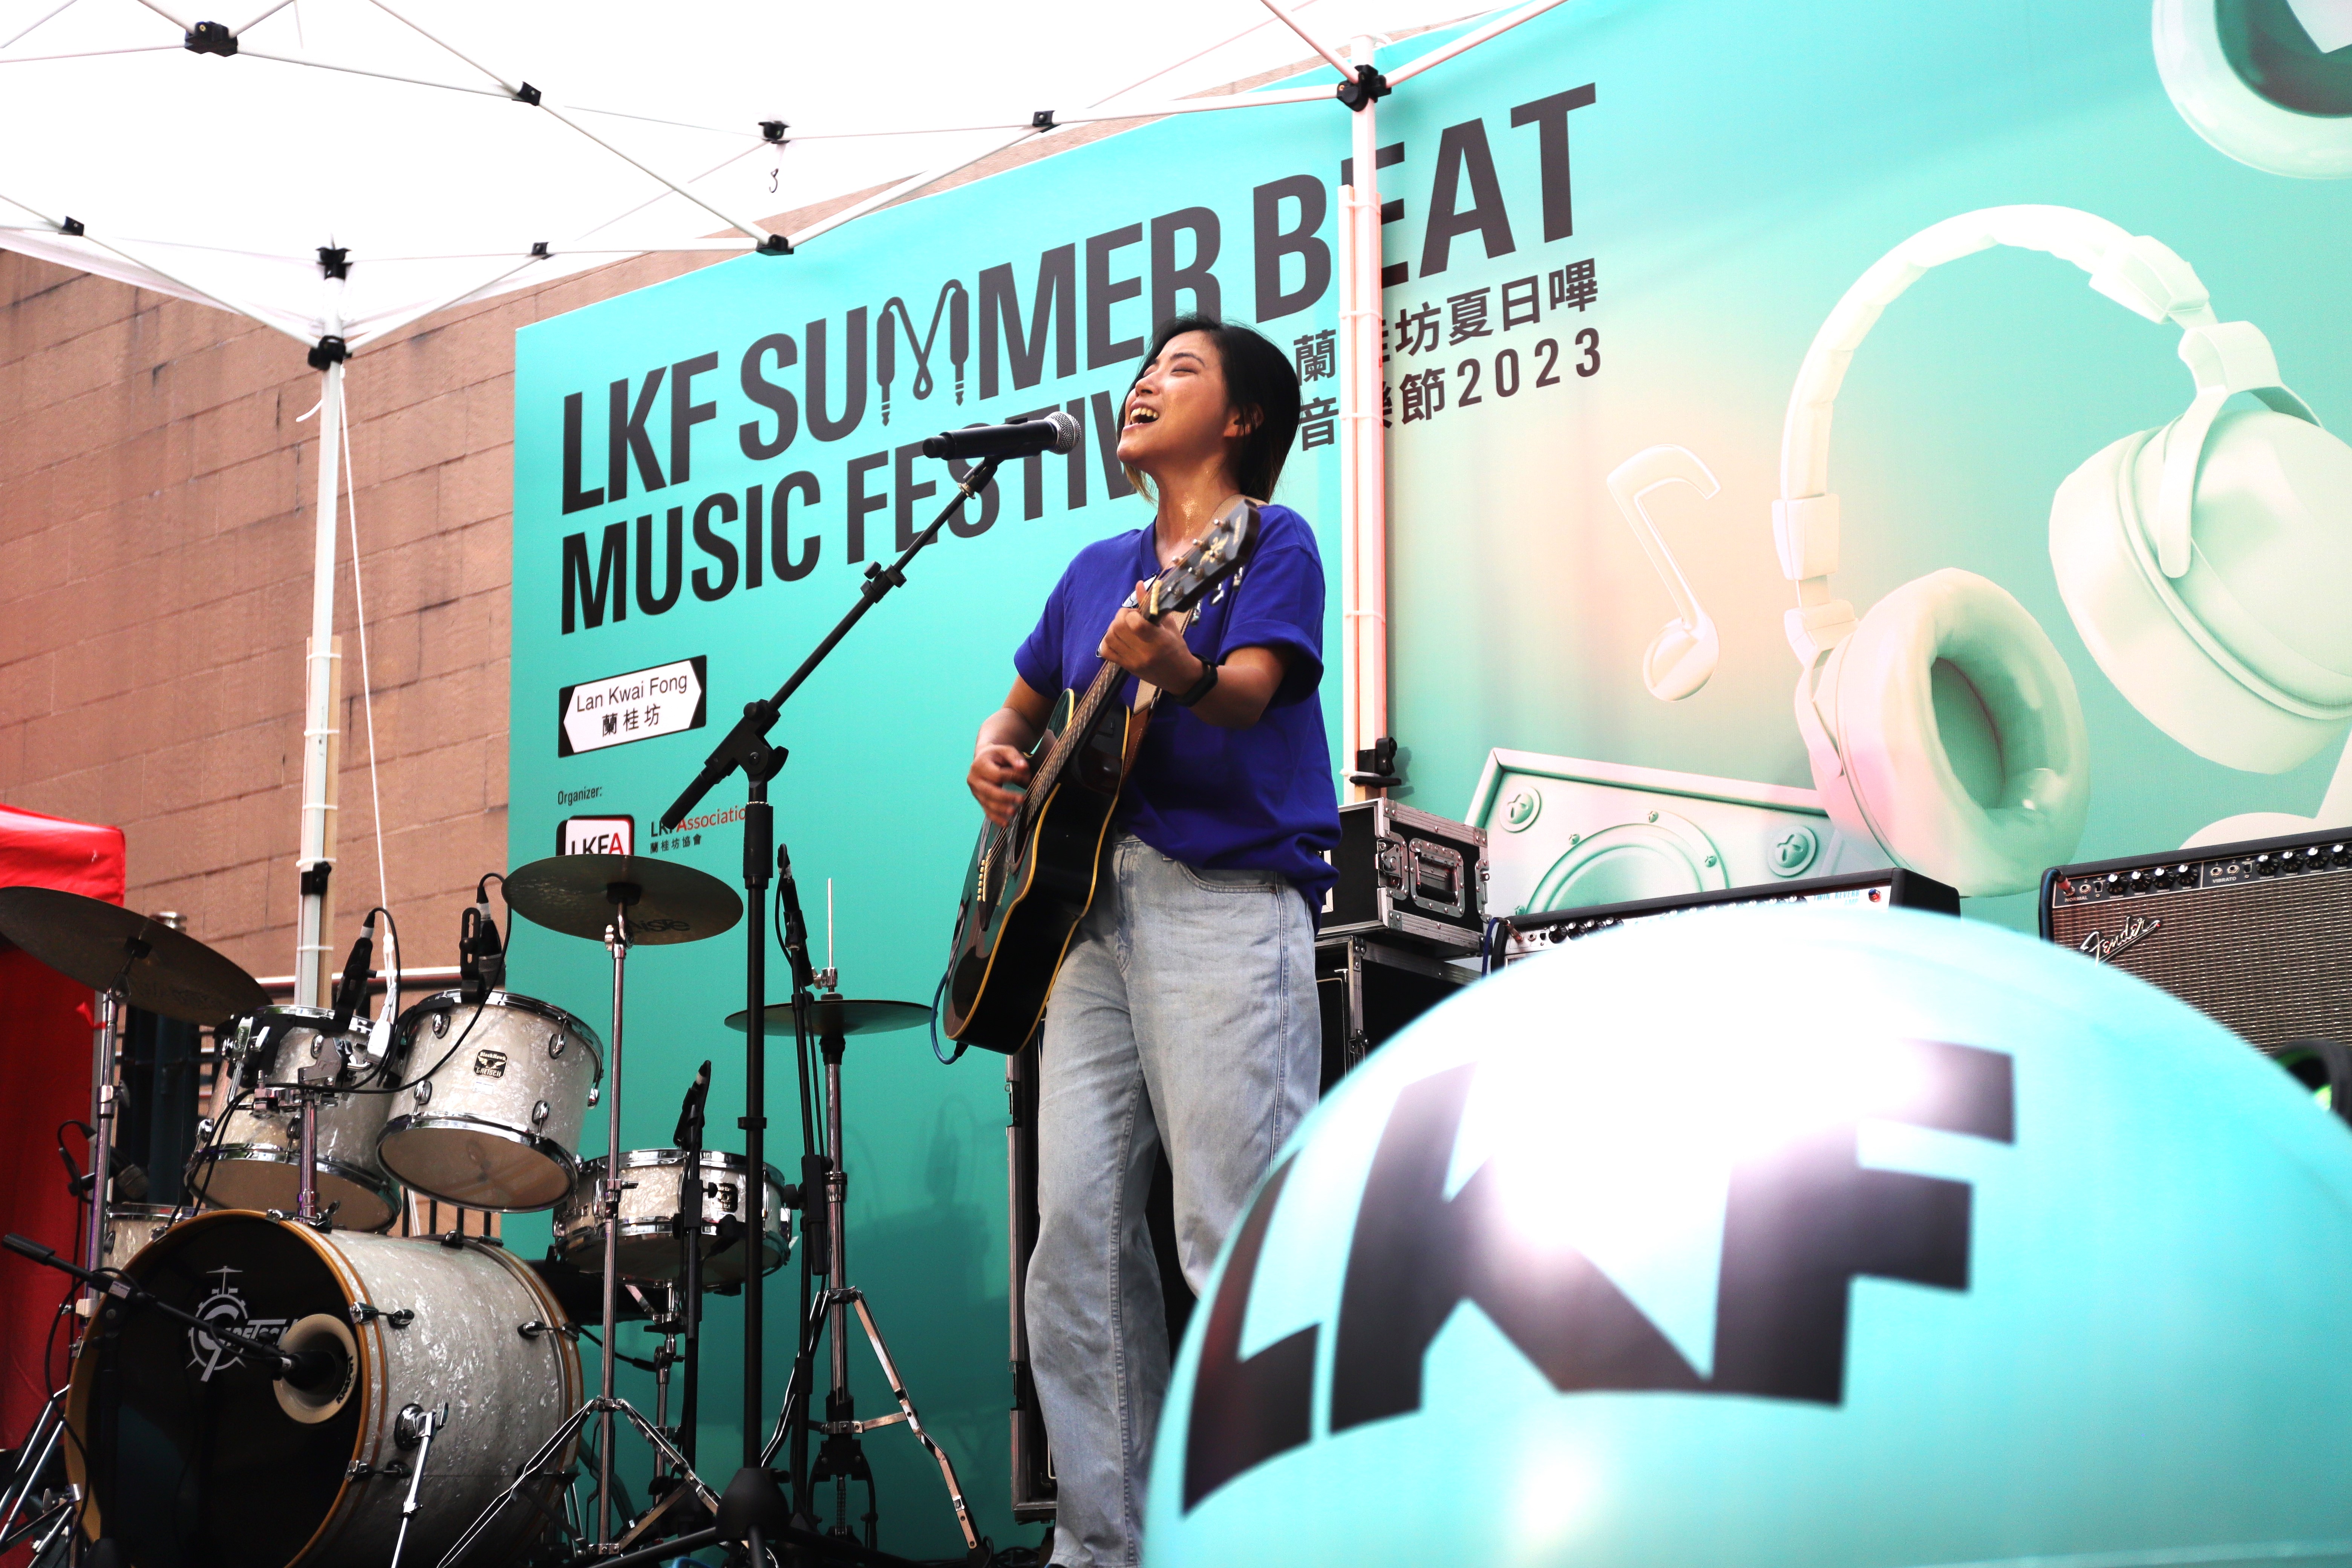 Festival-goers groove to the infectious beats, igniting the dance floor with their energetic moves during the LKF Summer Beat Music Festival 2023 in Lan Kwai Fong